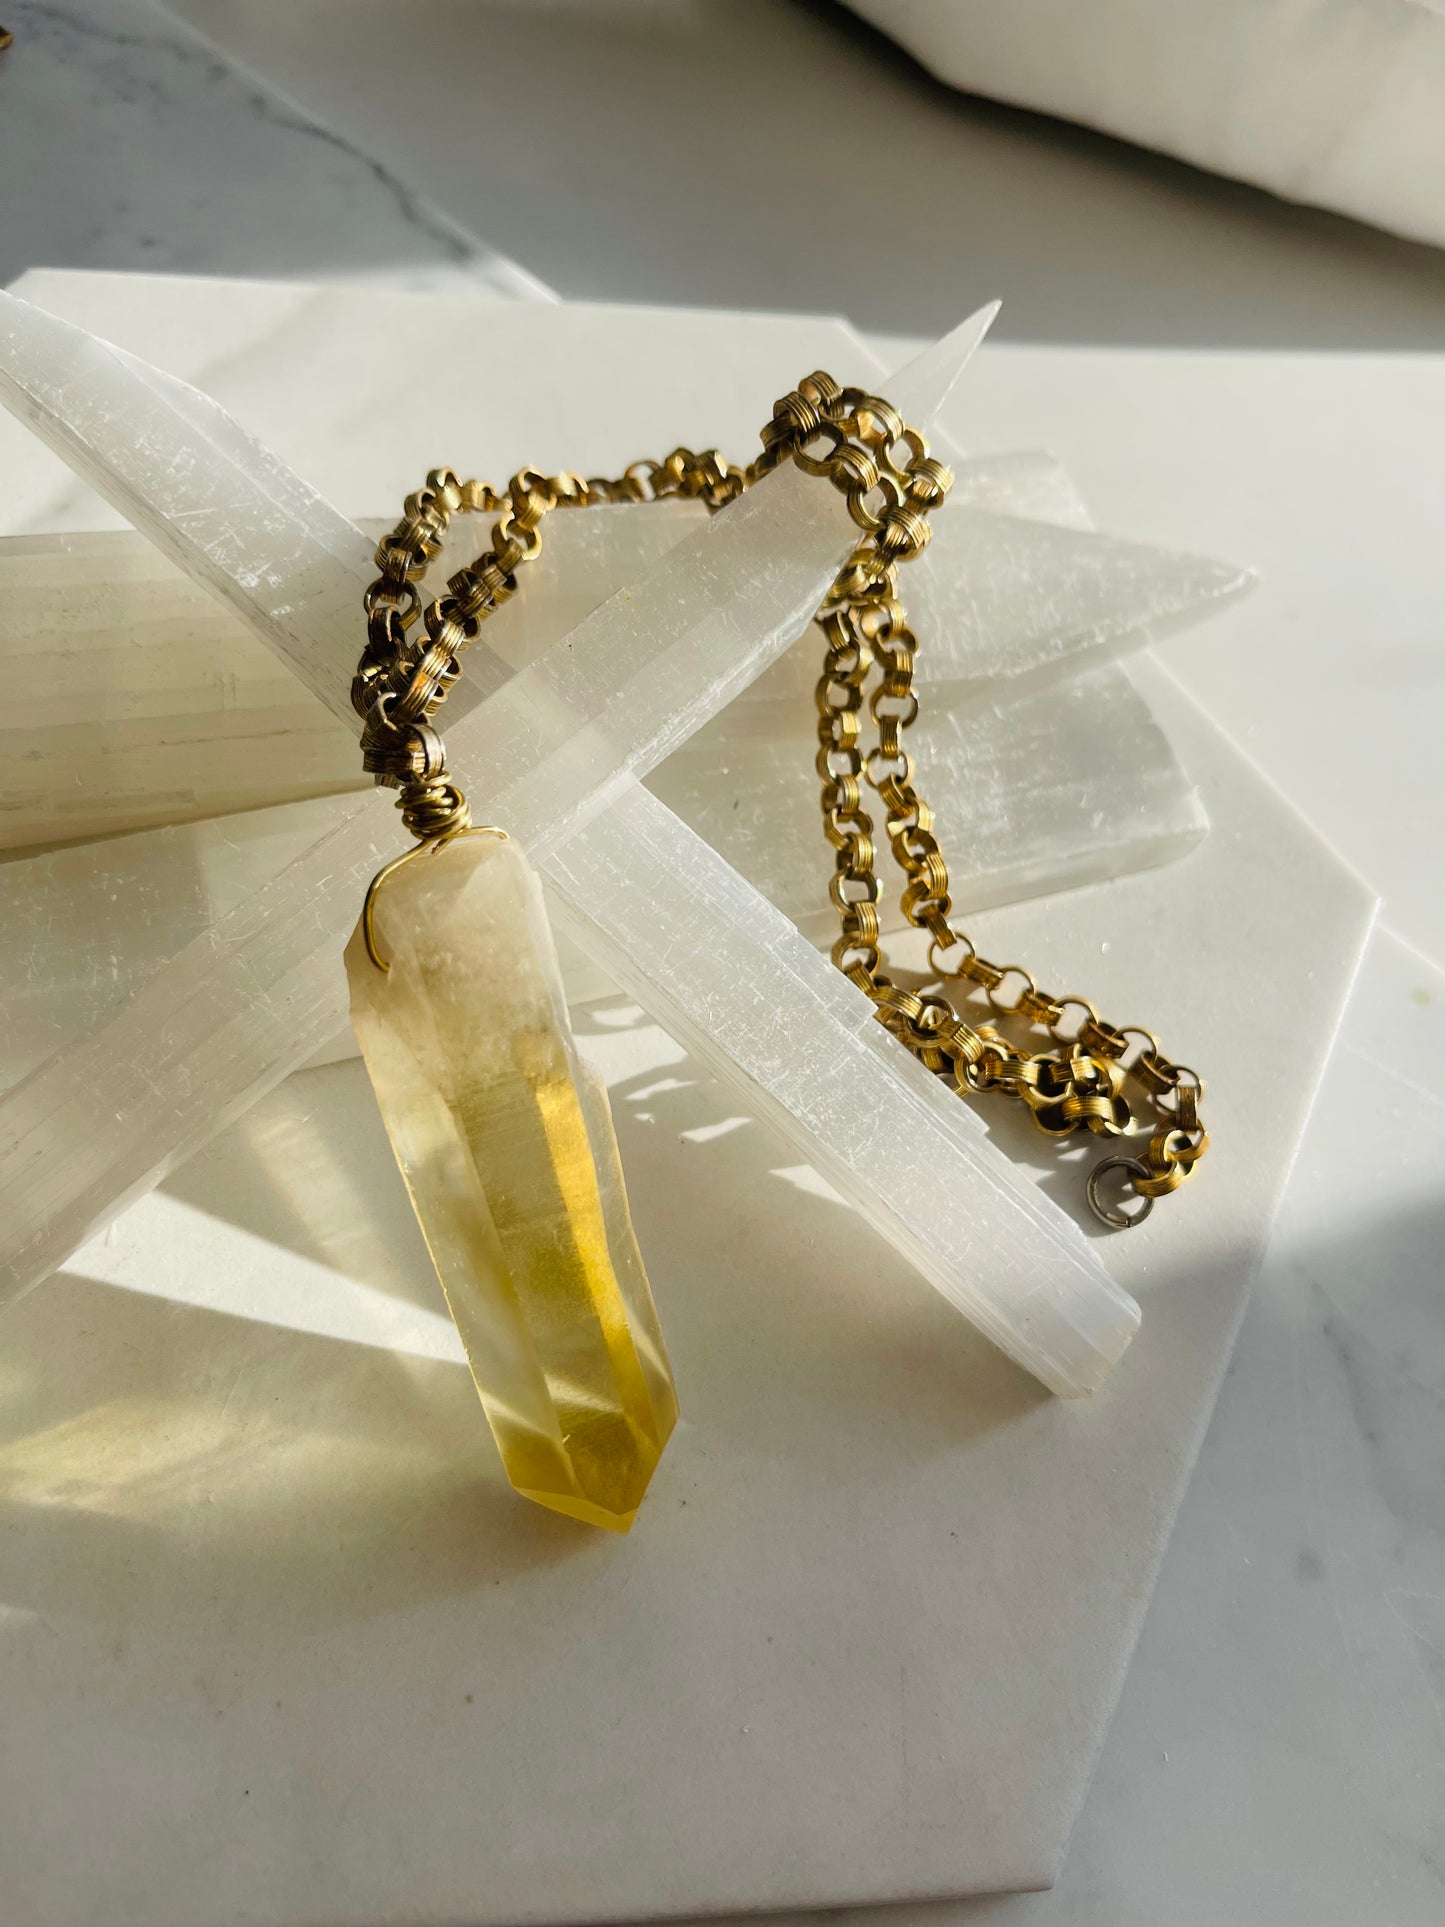 Create Abundance! Manifest! Raw High Quality Citrine Soul Chain Necklace Hand wrapped on vintage chain